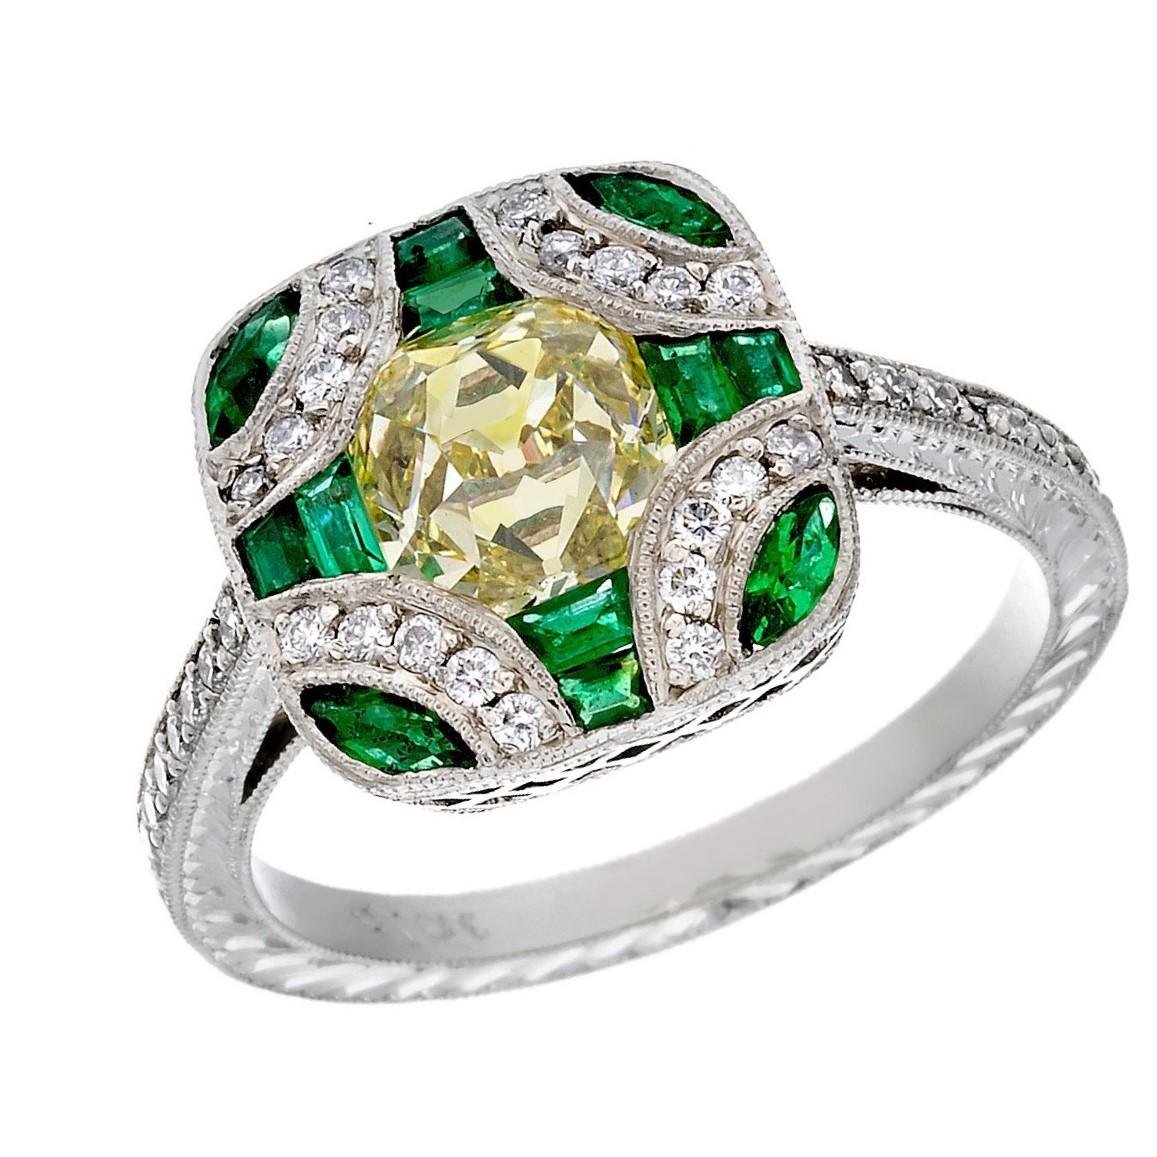 Antique Edwardian Style Fancy Yellow Old Mine Cut Diamond and Emerald Ring im Angebot 1